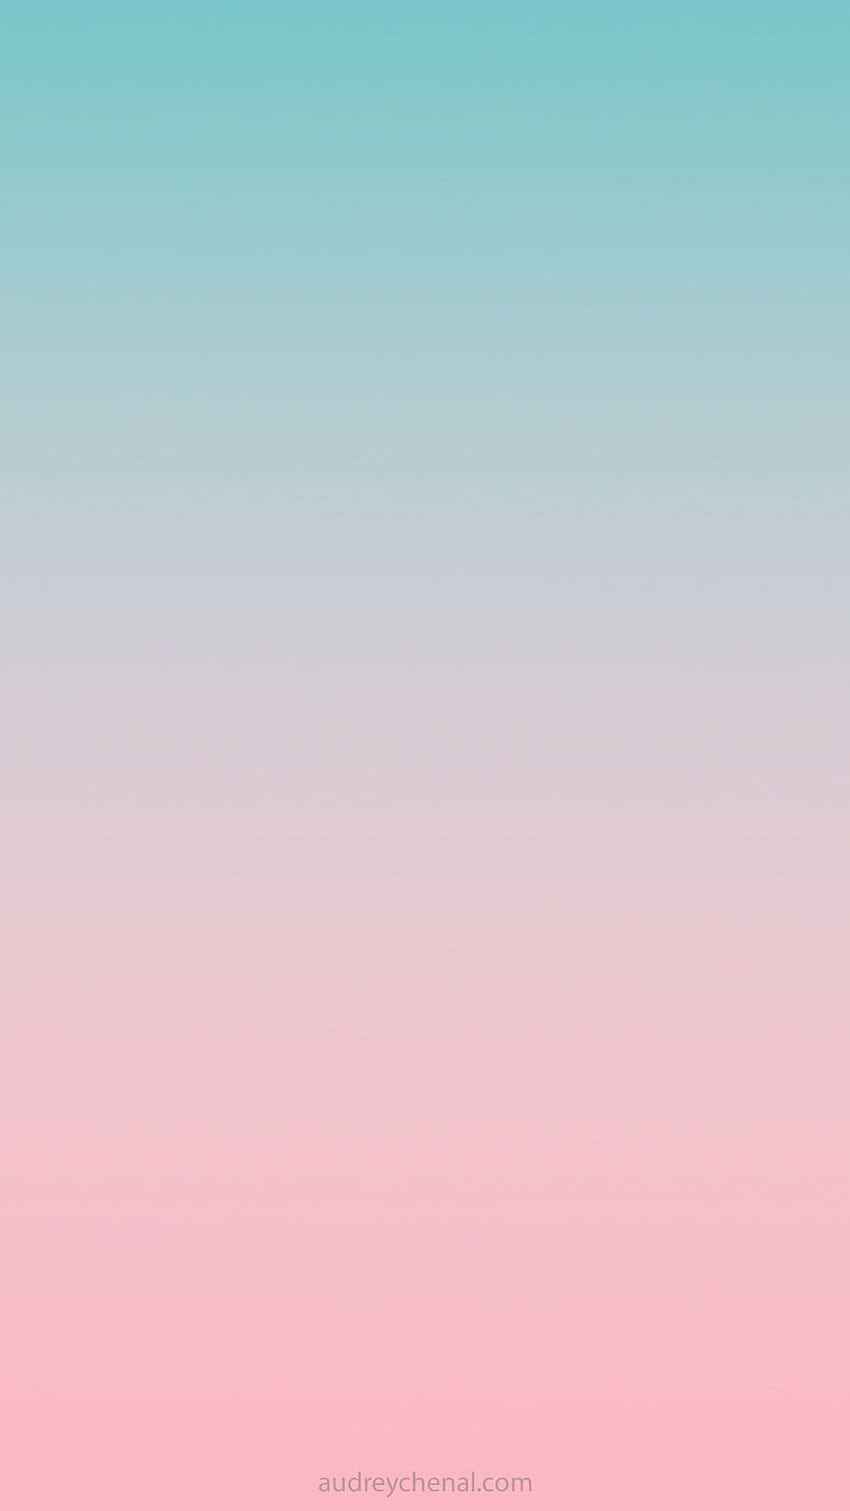 Smart Phone 1. Instagram story background, Pink and Teal HD phone wallpaper